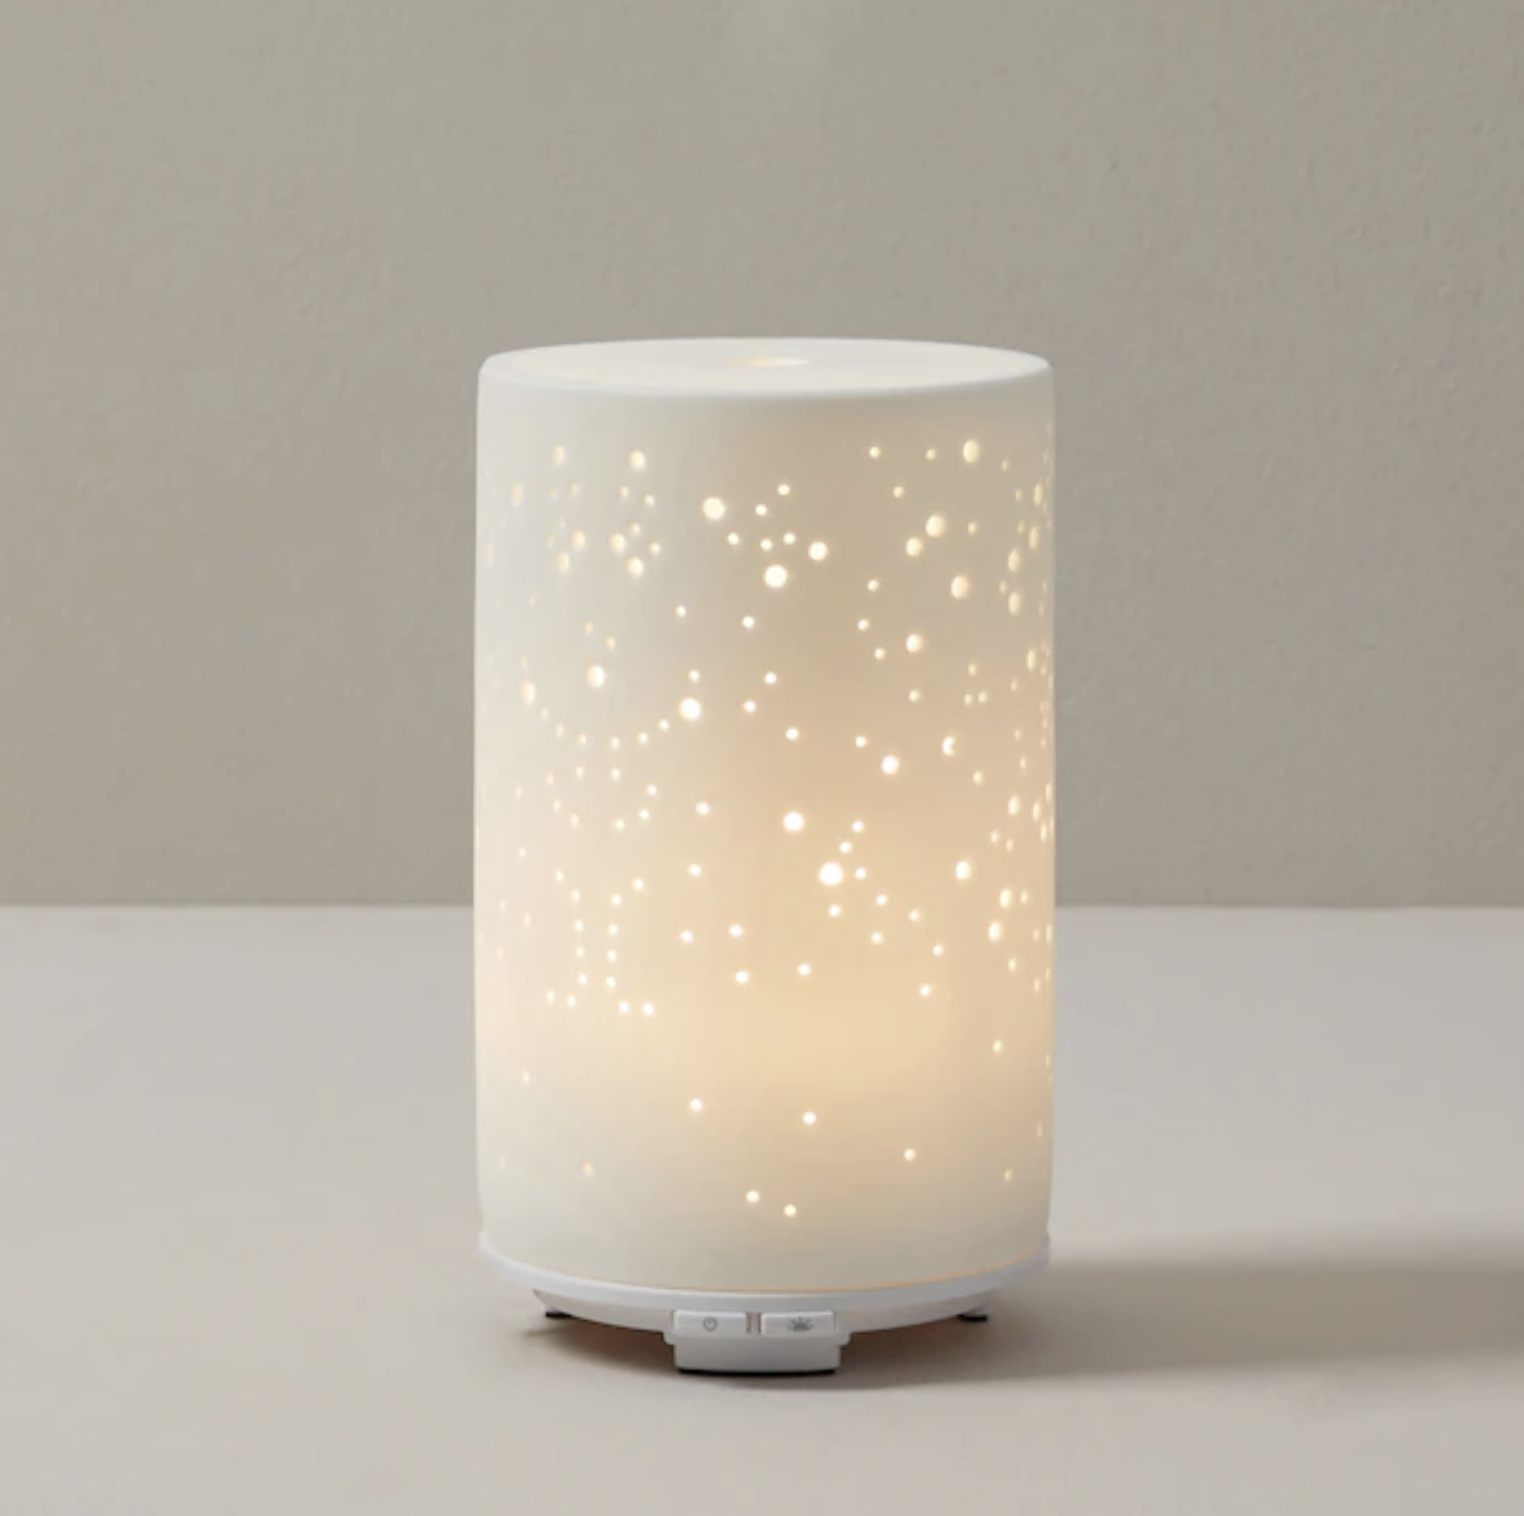 The lit up diffuser on a blank background